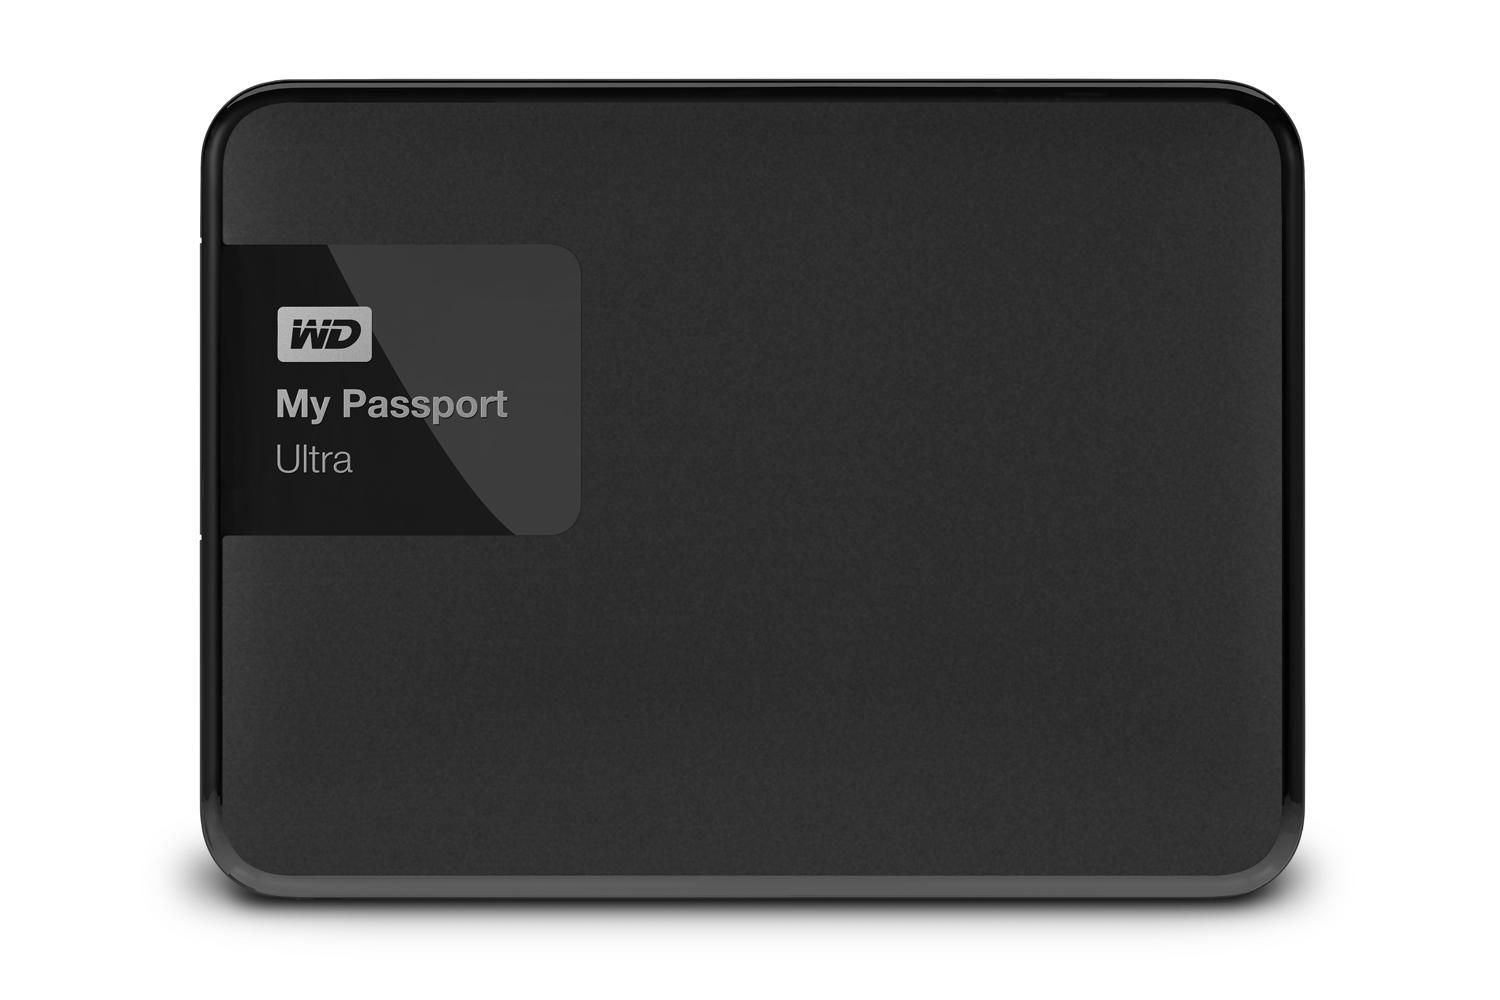 western digital raises portable my passport drive capacity to 3tb adds new colors wd mypassport ultra classic black may2015 2